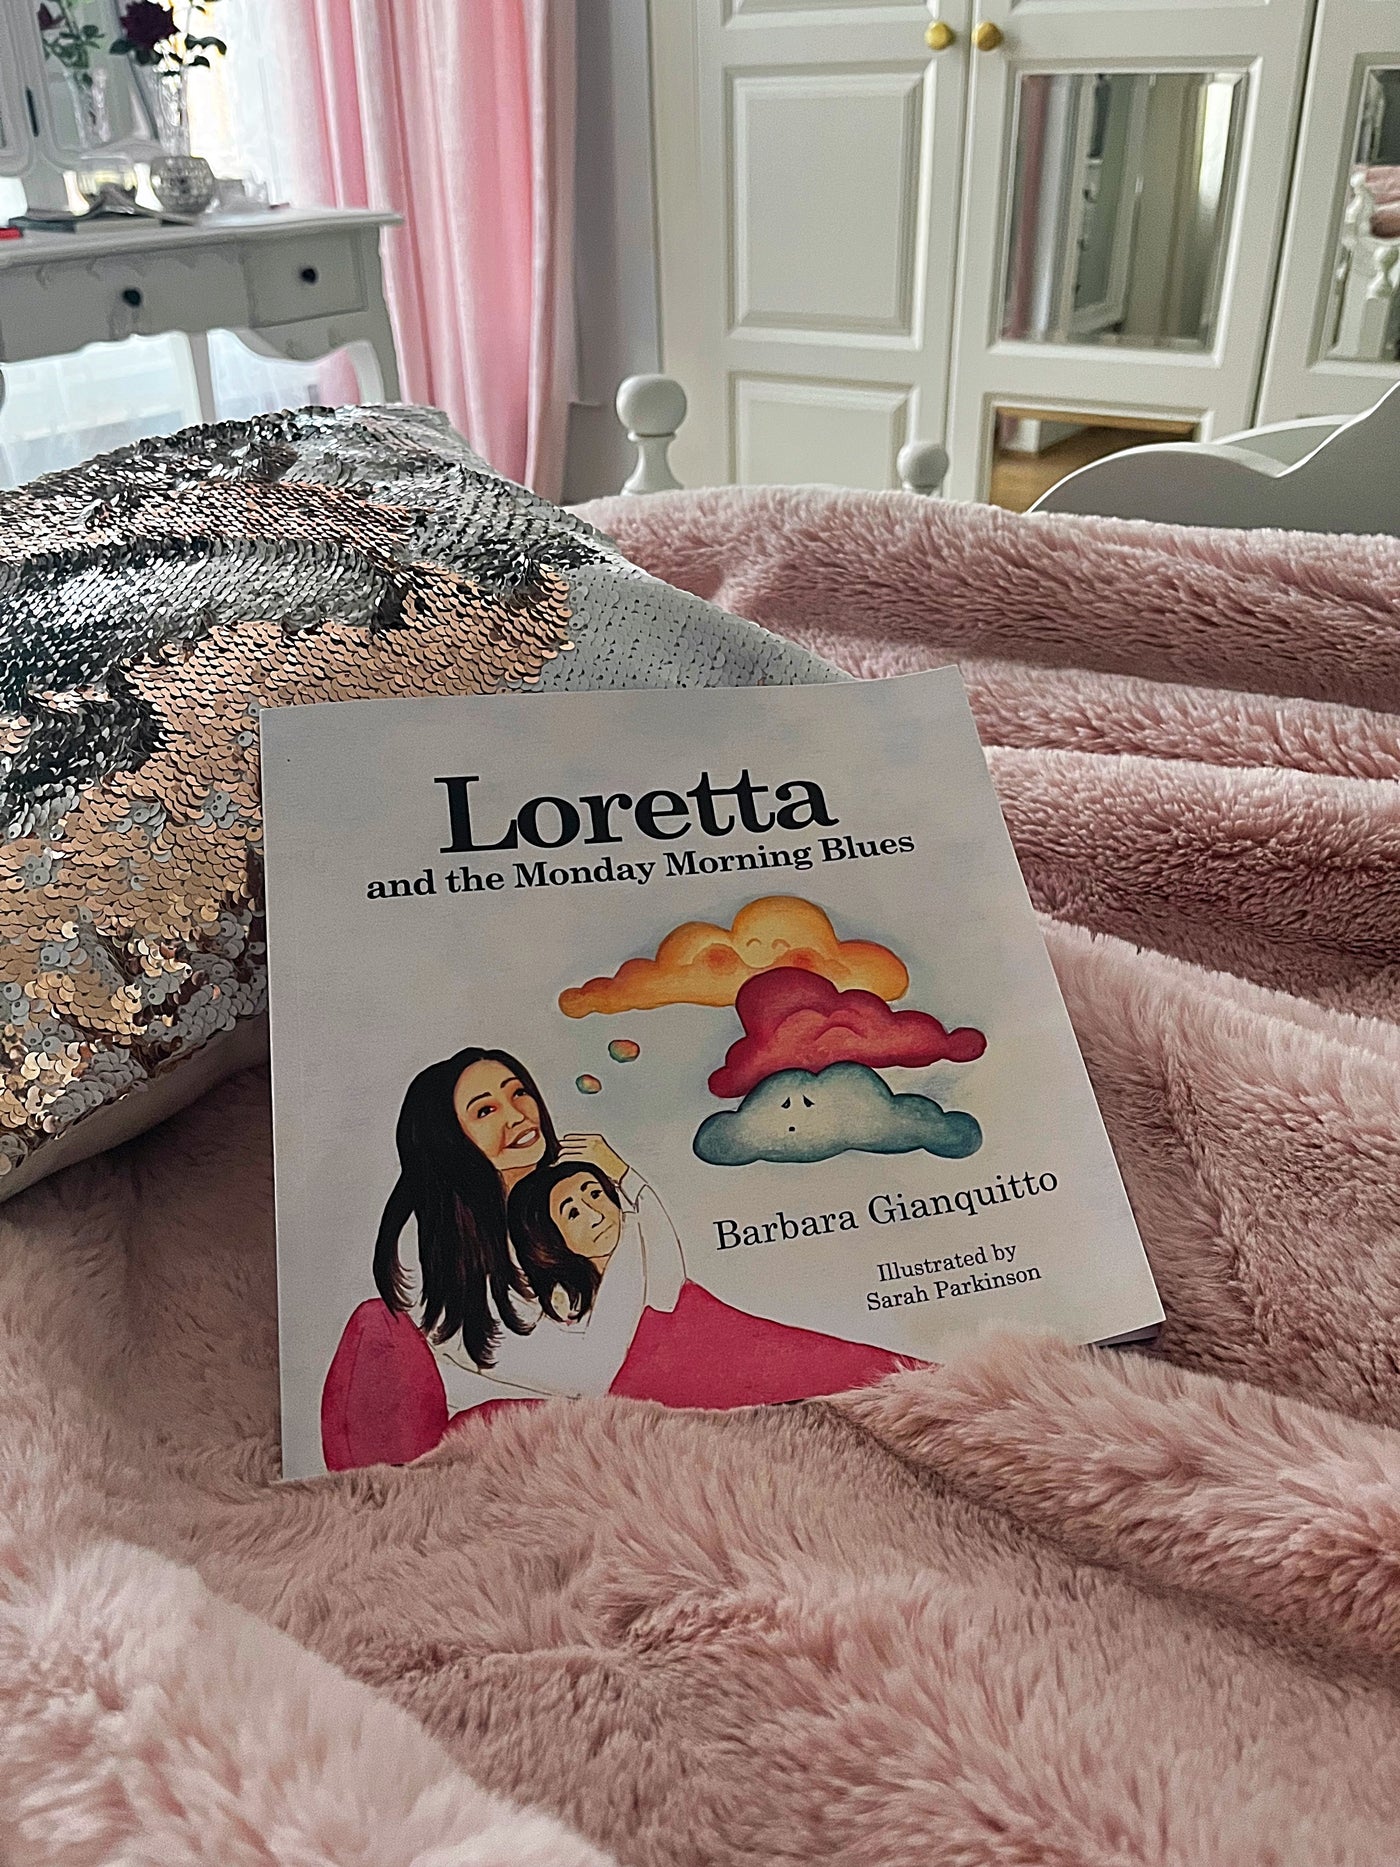 Loretta and the Monday Morning Blues - Children's book